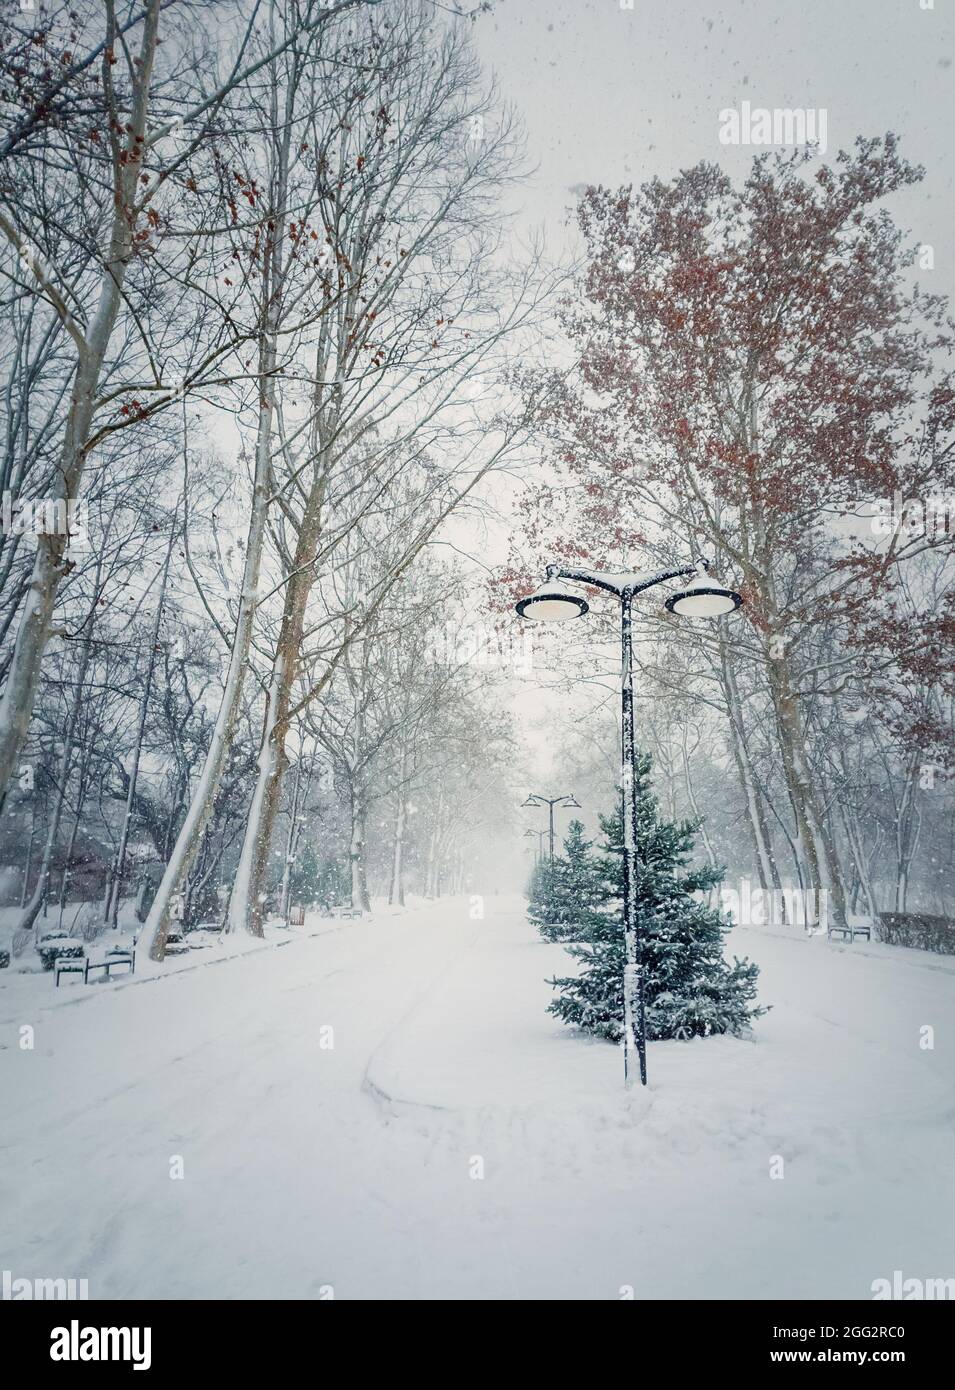 Cold, snowy winter morning in the park with multiple snowflakes falling from the sky. Beautiful scene, cold season, snowfall atmosphere in the square. Stock Photo